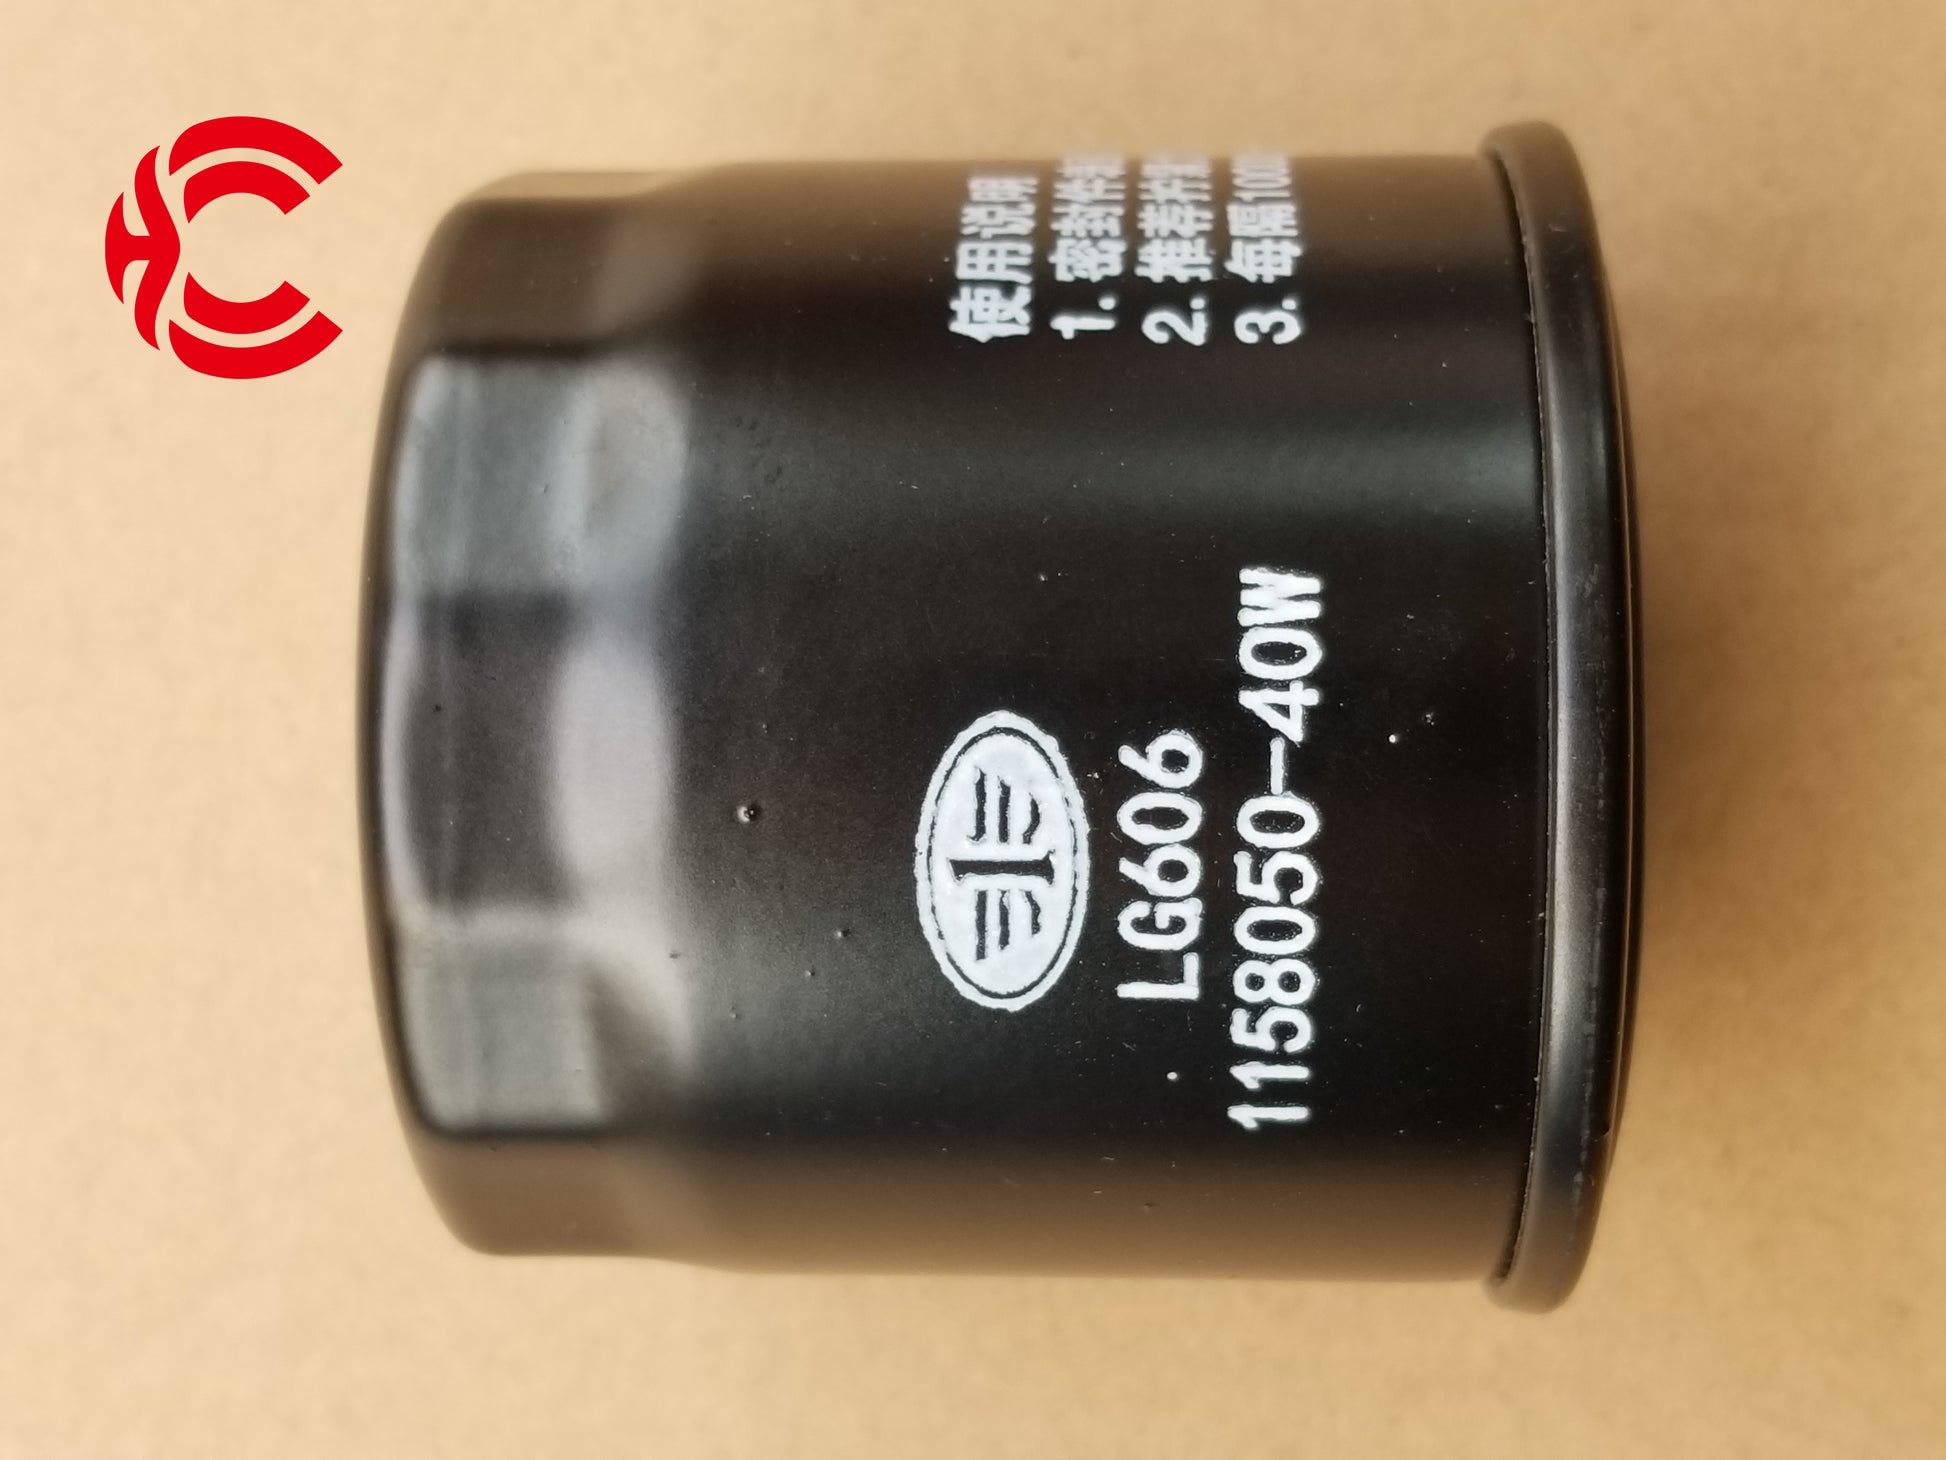 OEM: 1158050-40WMaterial: ABS metalColor: black silverOrigin: Made in ChinaWeight: 100gPacking List: 1* Adblue/Urea Filter More ServiceWe can provide OEM Manufacturing serviceWe can Be your one-step solution for Auto PartsWe can provide technical scheme for you Feel Free to Contact Us, We will get back to you as soon as possible.